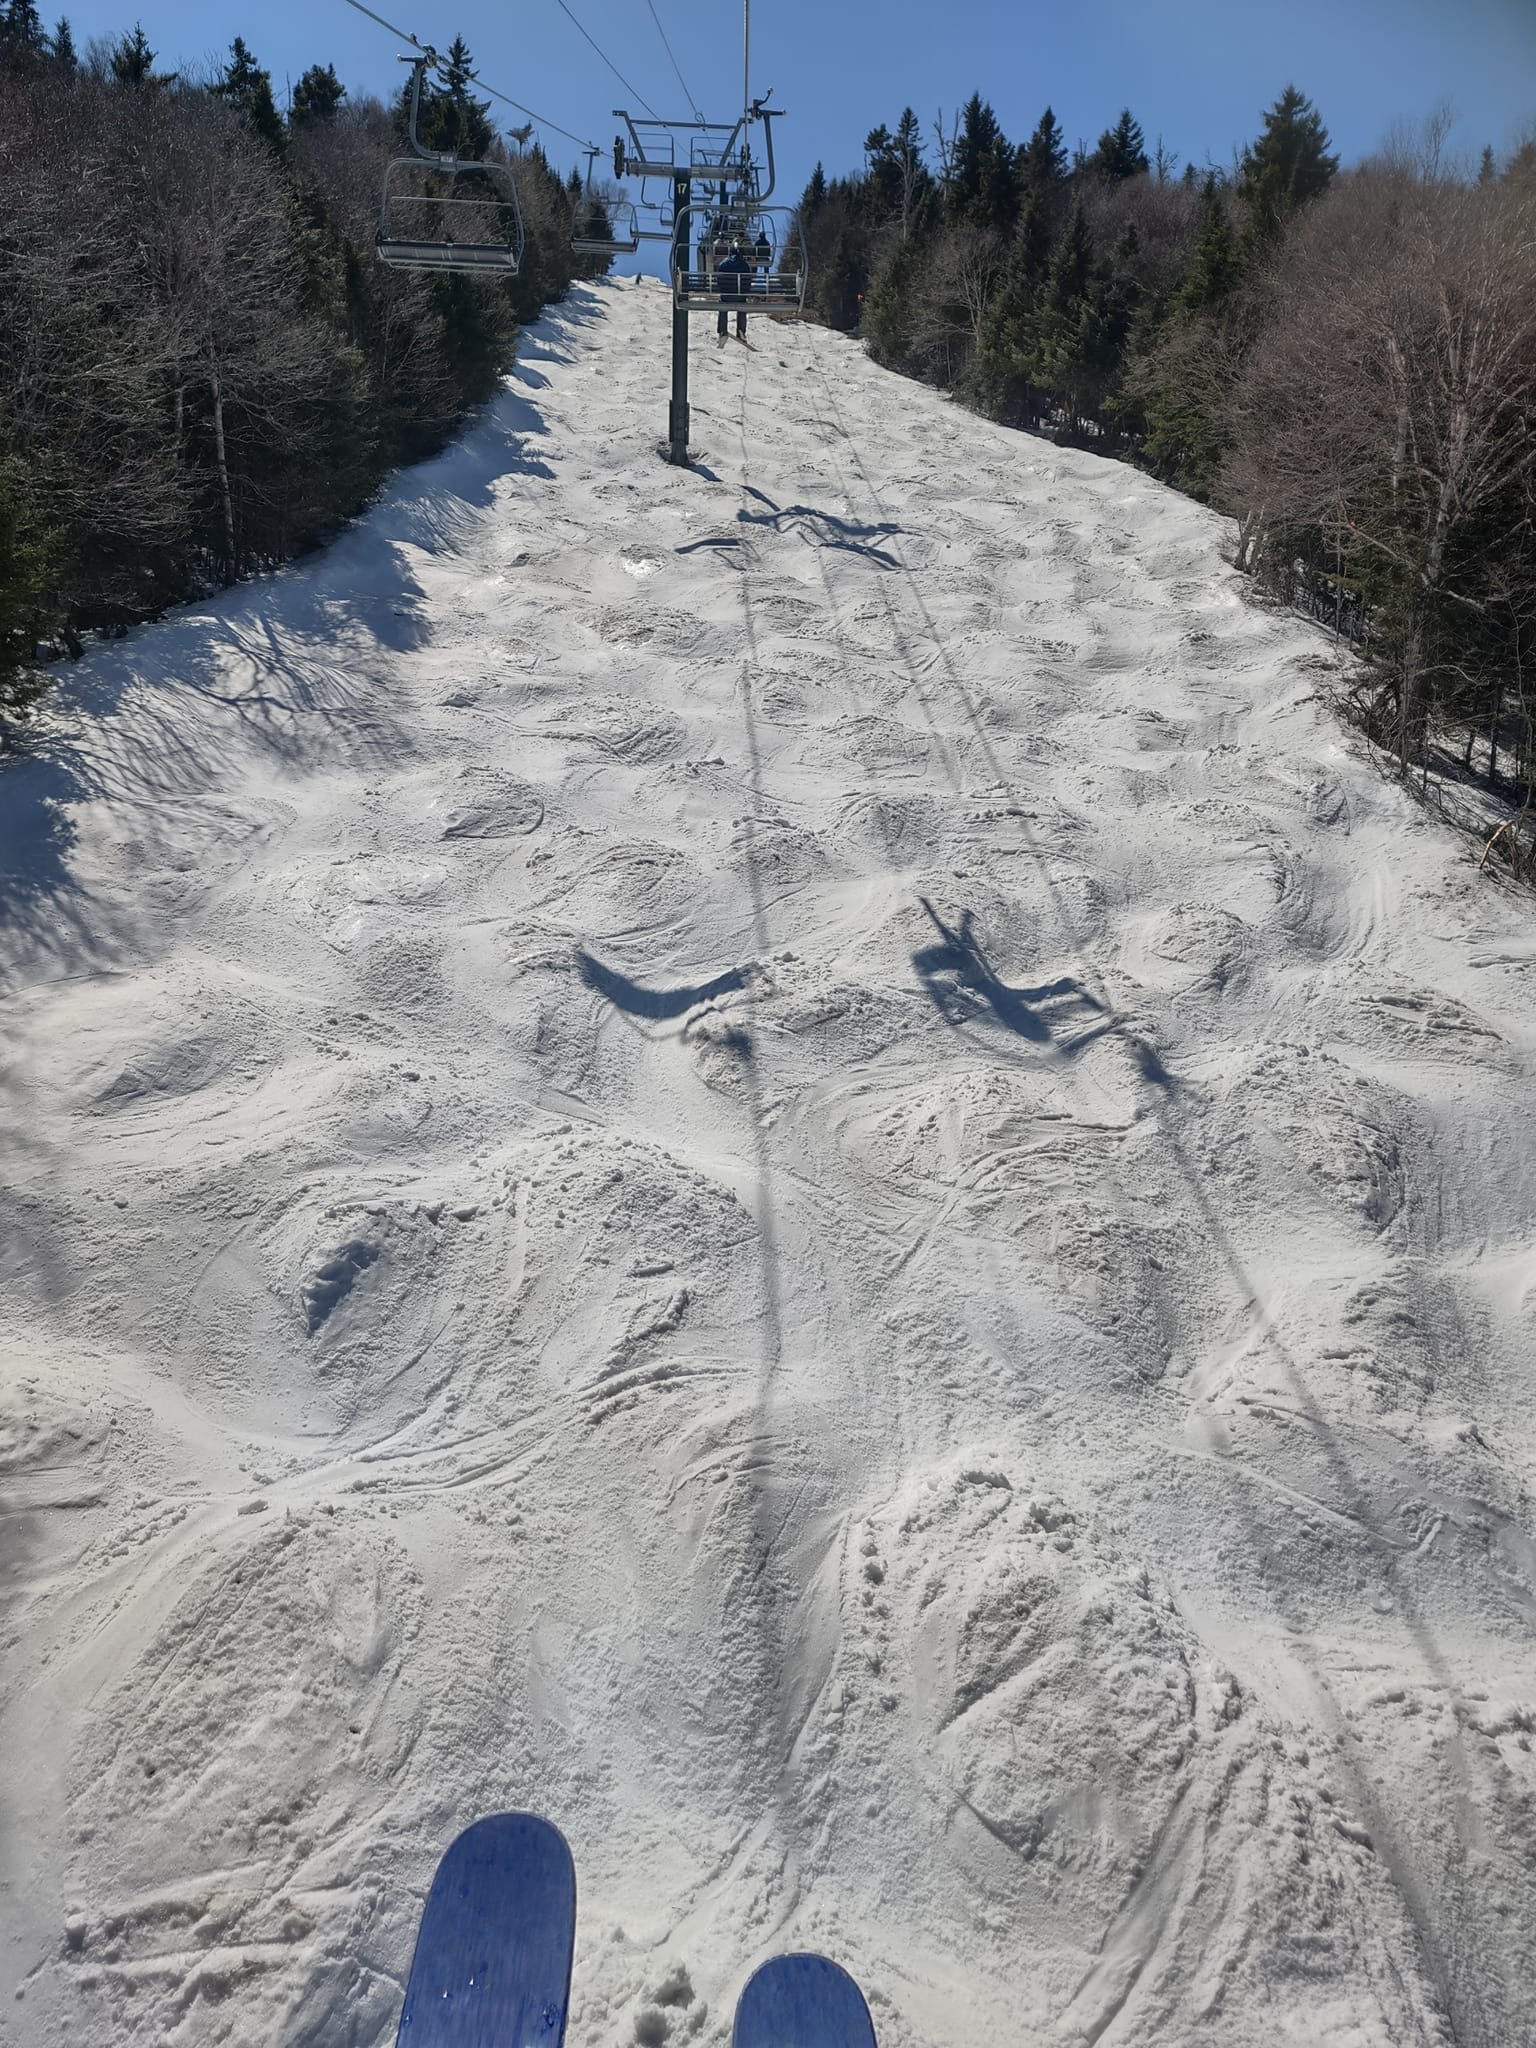 Spring skiing... My happy place!